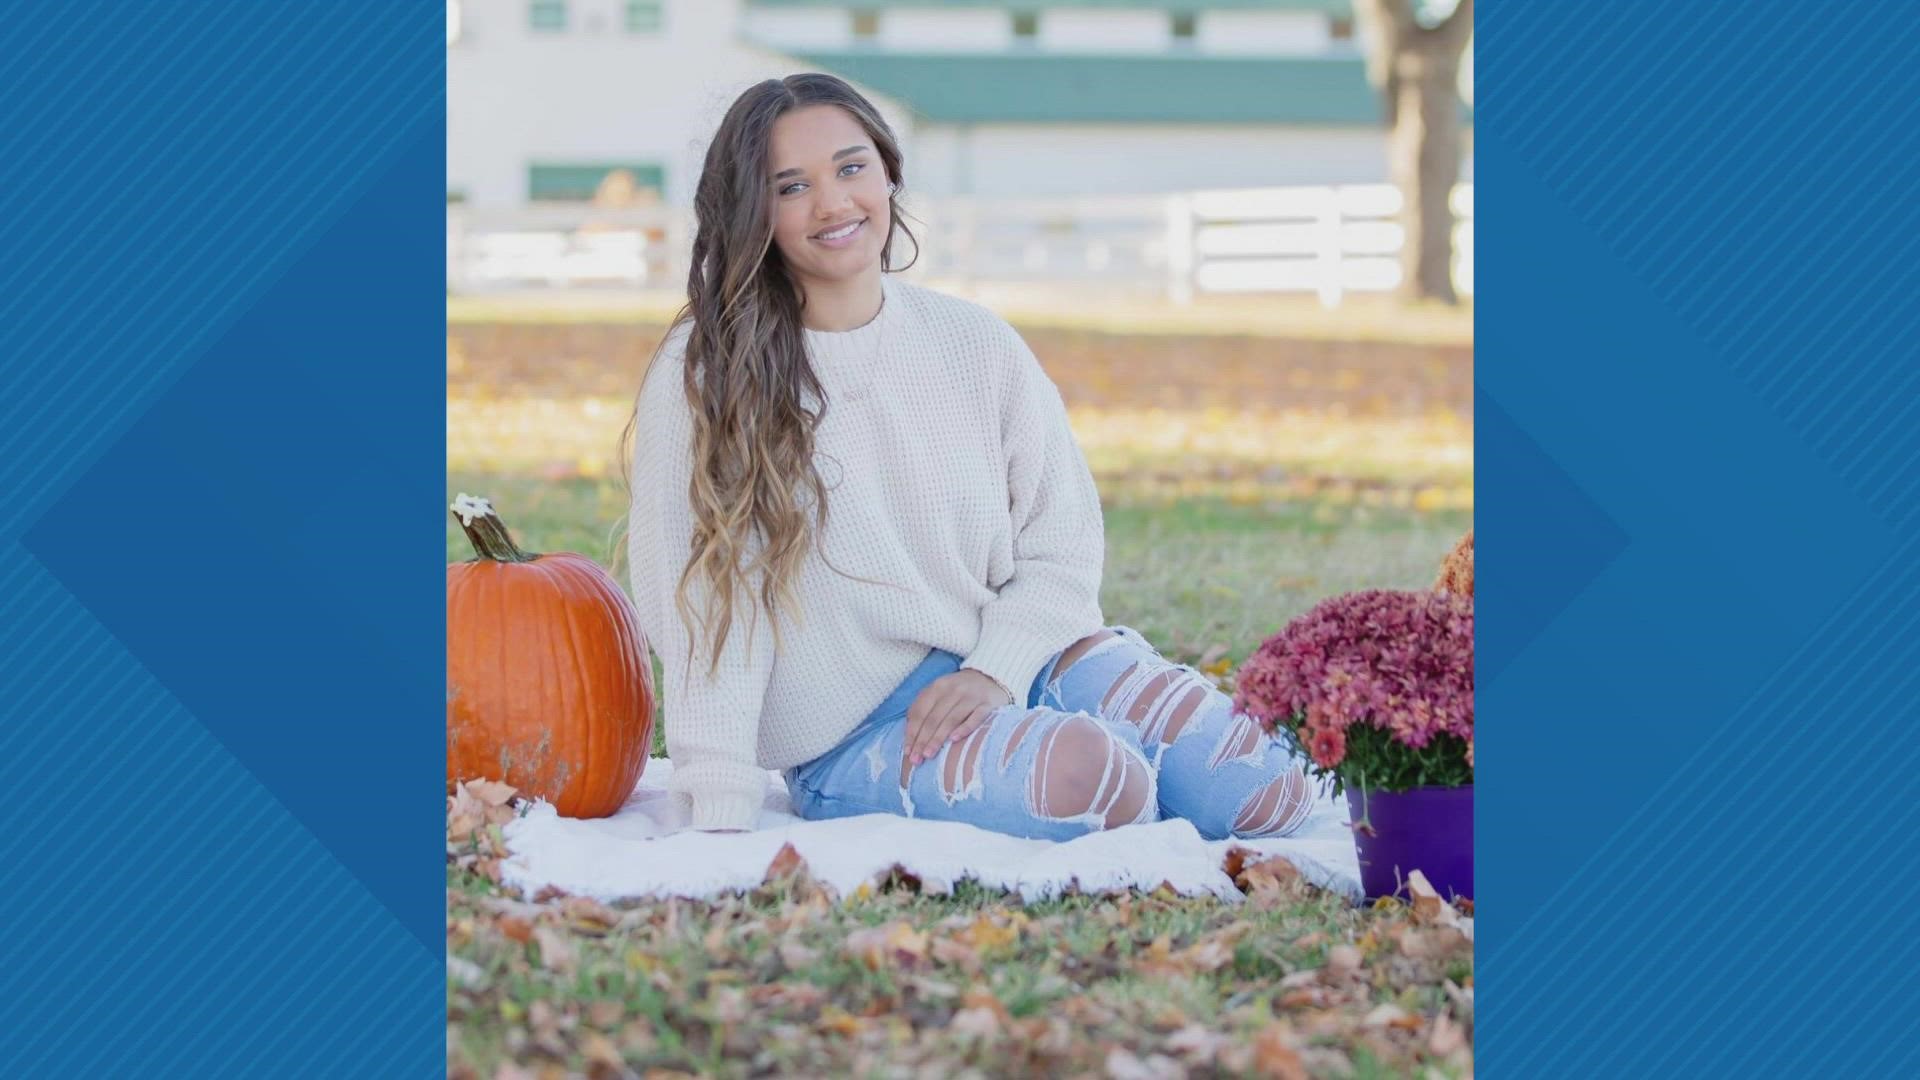 A 16-year-old is in the hospital with critical, life-altering injuries after being hit by a car Saturday night. The teenager, Janae Edmondson, is from Tennessee.